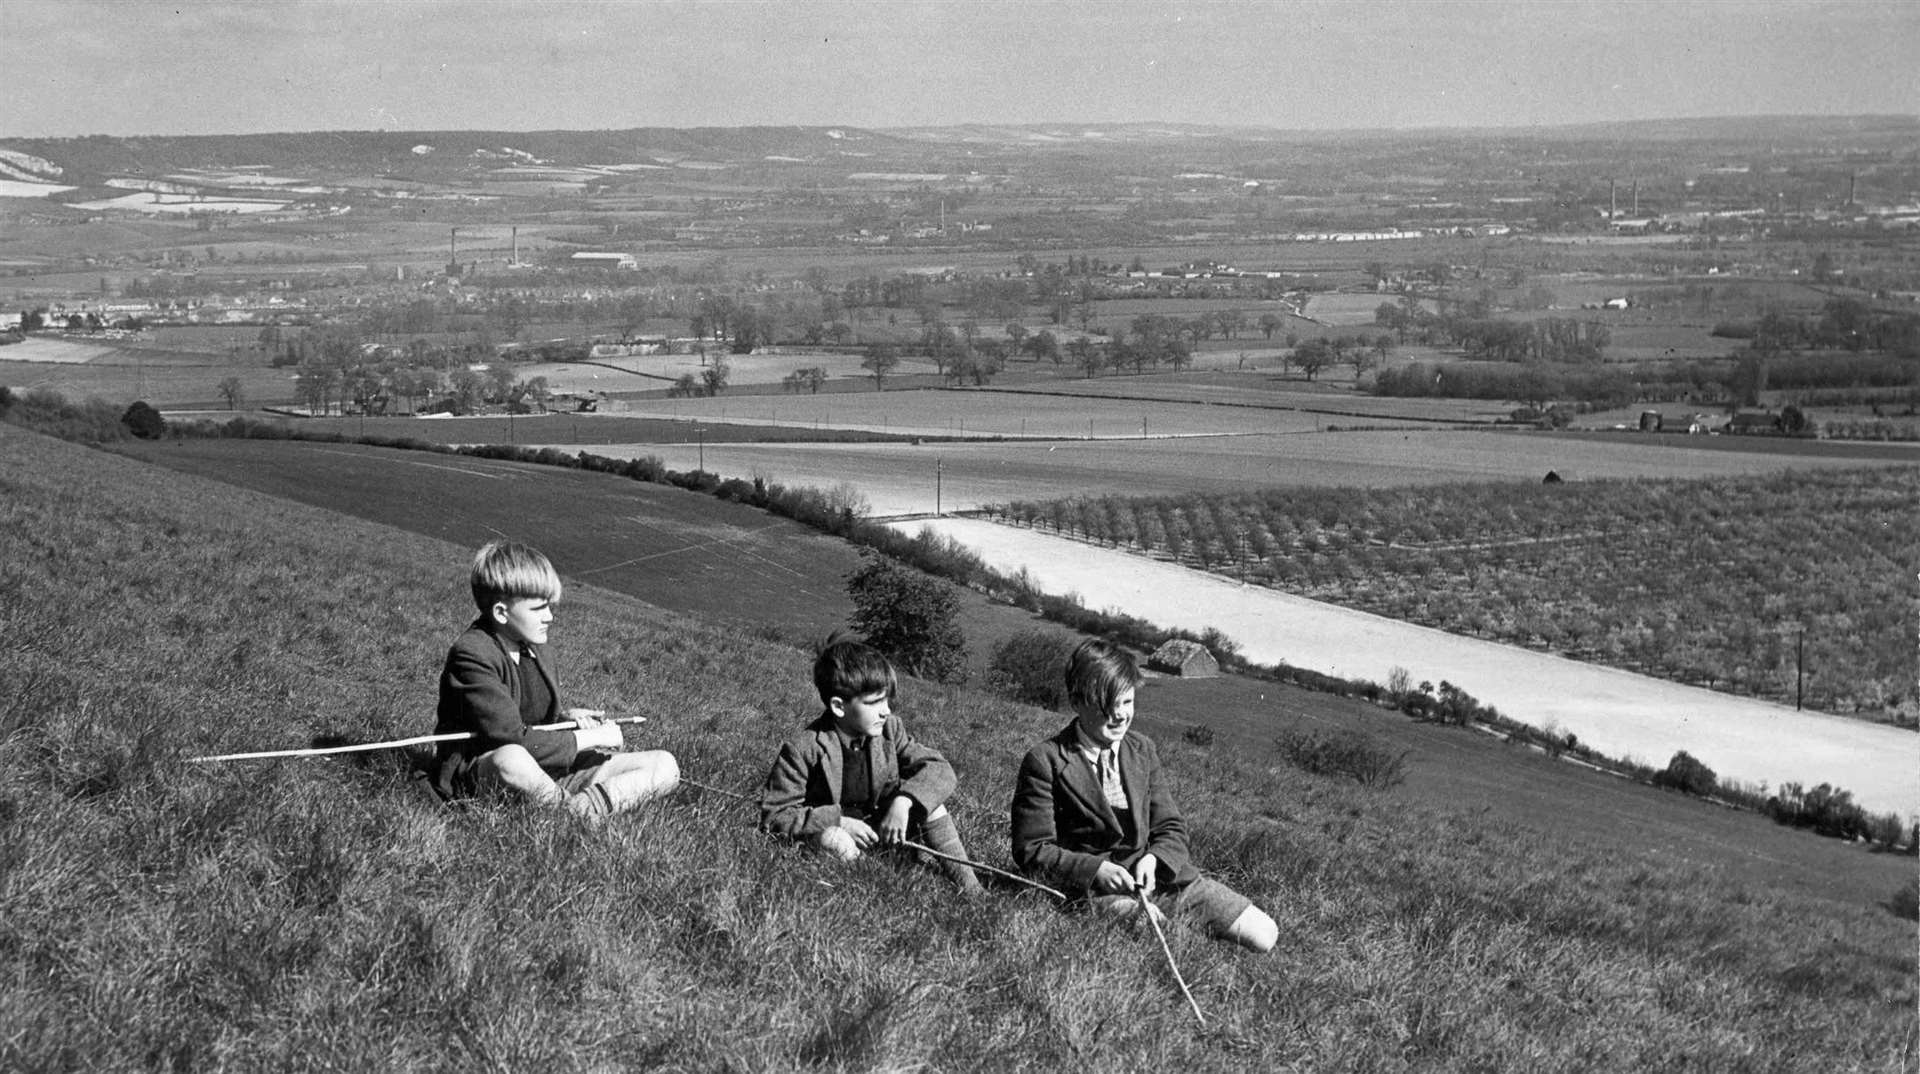 A charming view of the Medway Valley in 1954 - boys at play still wore jackets and ties